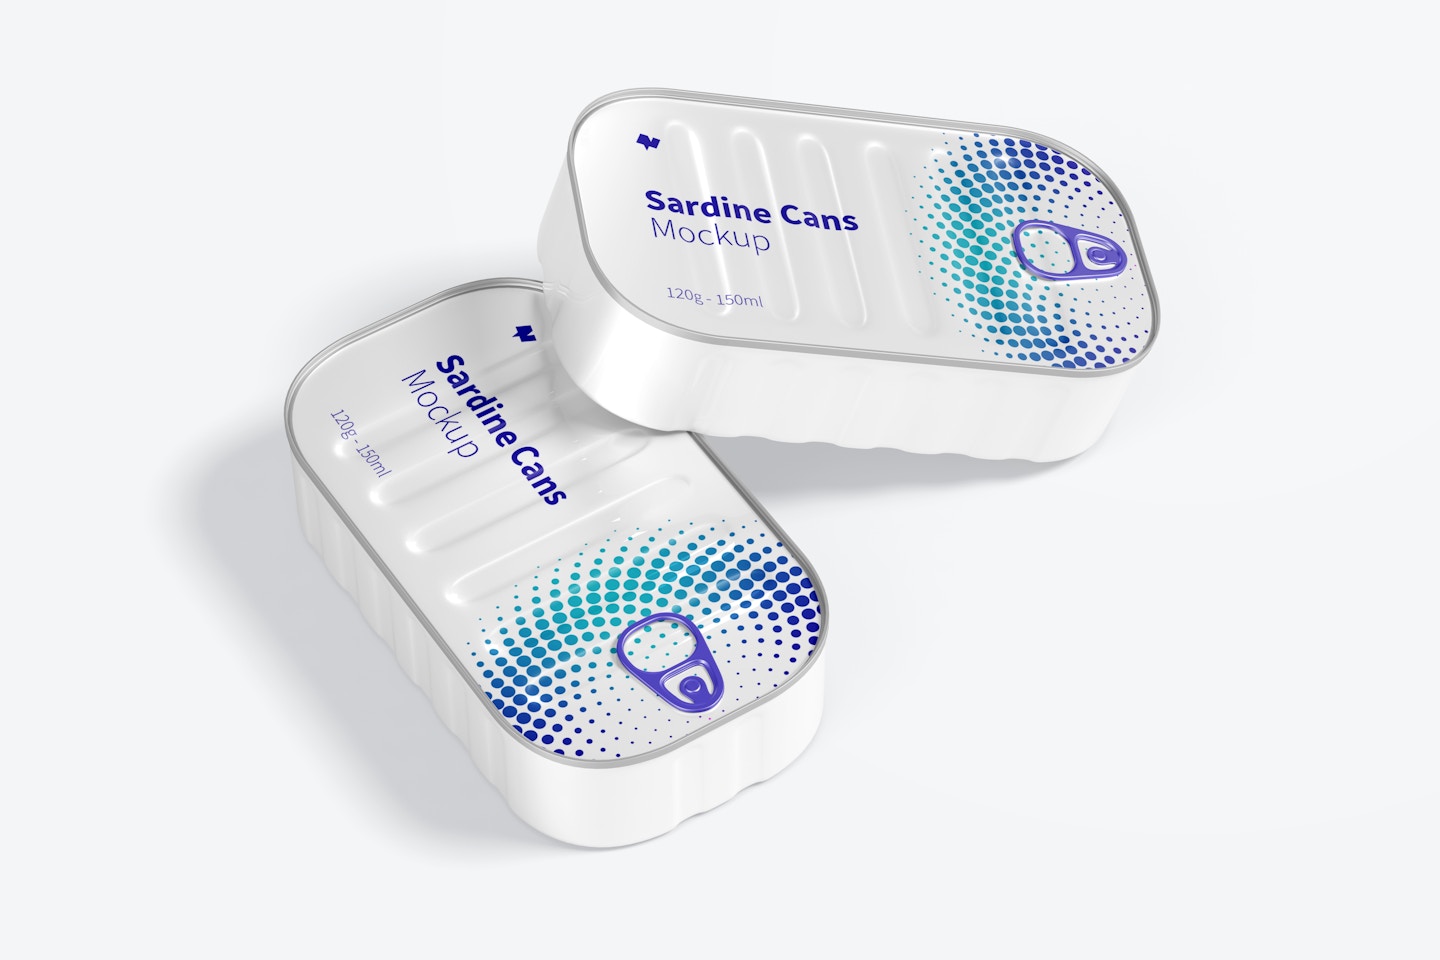 120g Sardine Cans Mockup, Top View